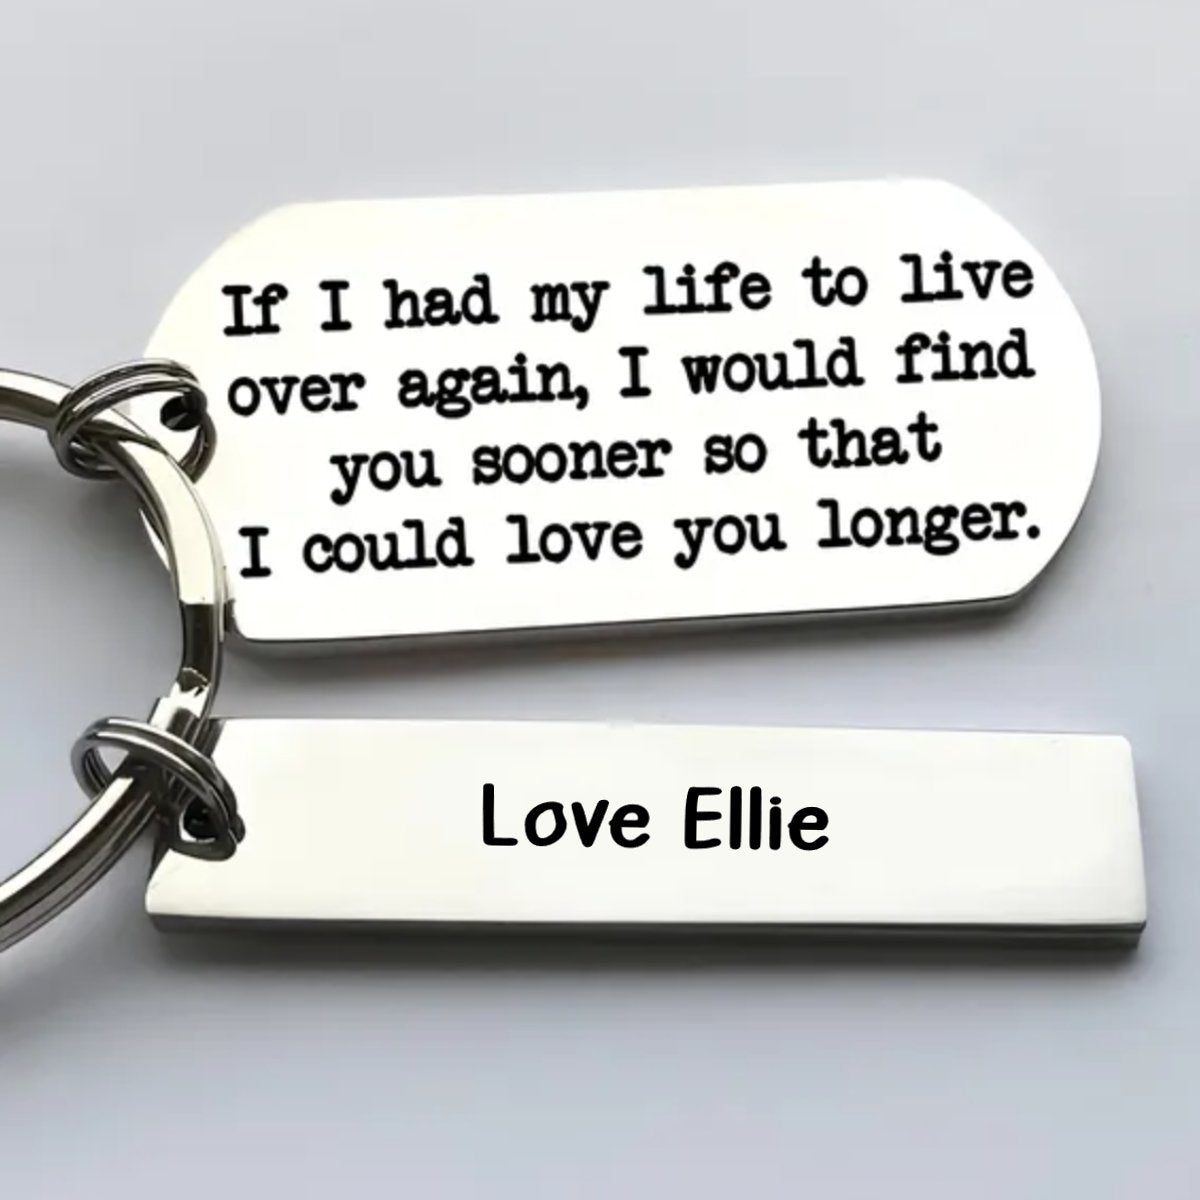 When Tomorrow Start Without Me Don't Think We're Far Apart - Personalized Keychain - The Next Custom Gift